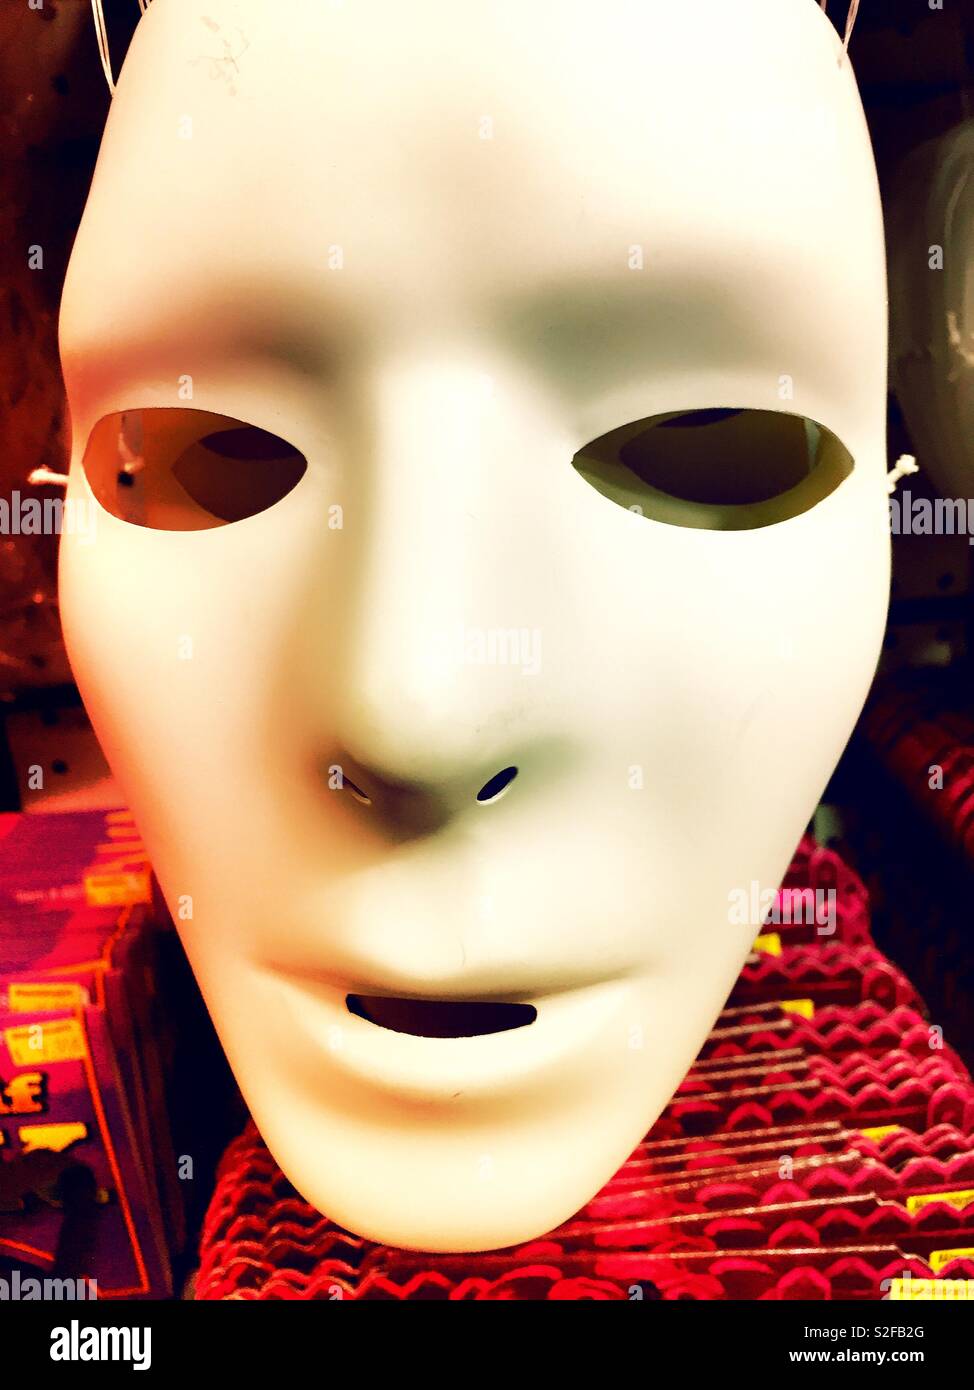 Halloween mask for sale at retail novelty store, USA Stock Photo